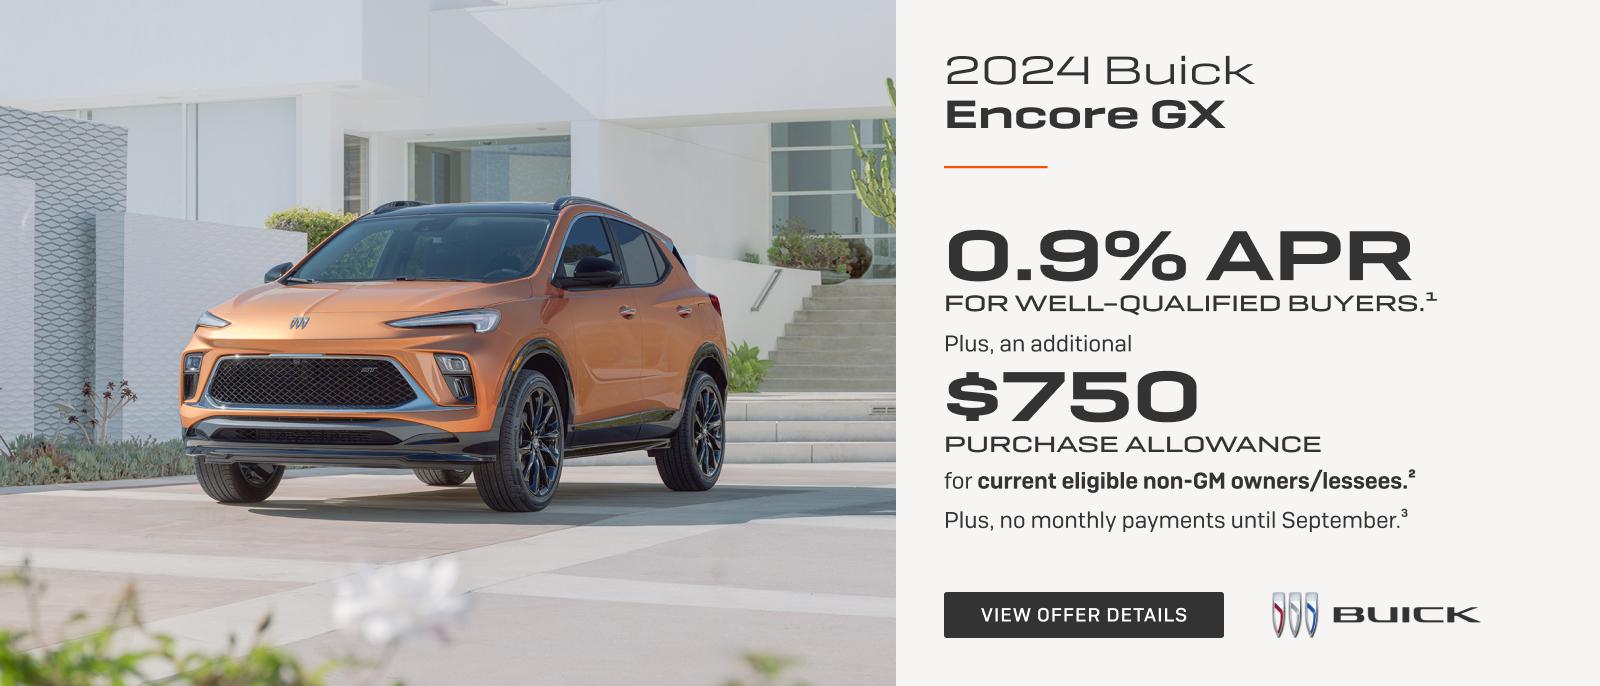 0.9% APR 
FOR WELL-QUALIFIED BUYERS.1

Plus, an additional $750 PURCHASE ALLOWANCE for current eligible non-GM owners/lessees.2

Plus, no monthly payments until September. 3